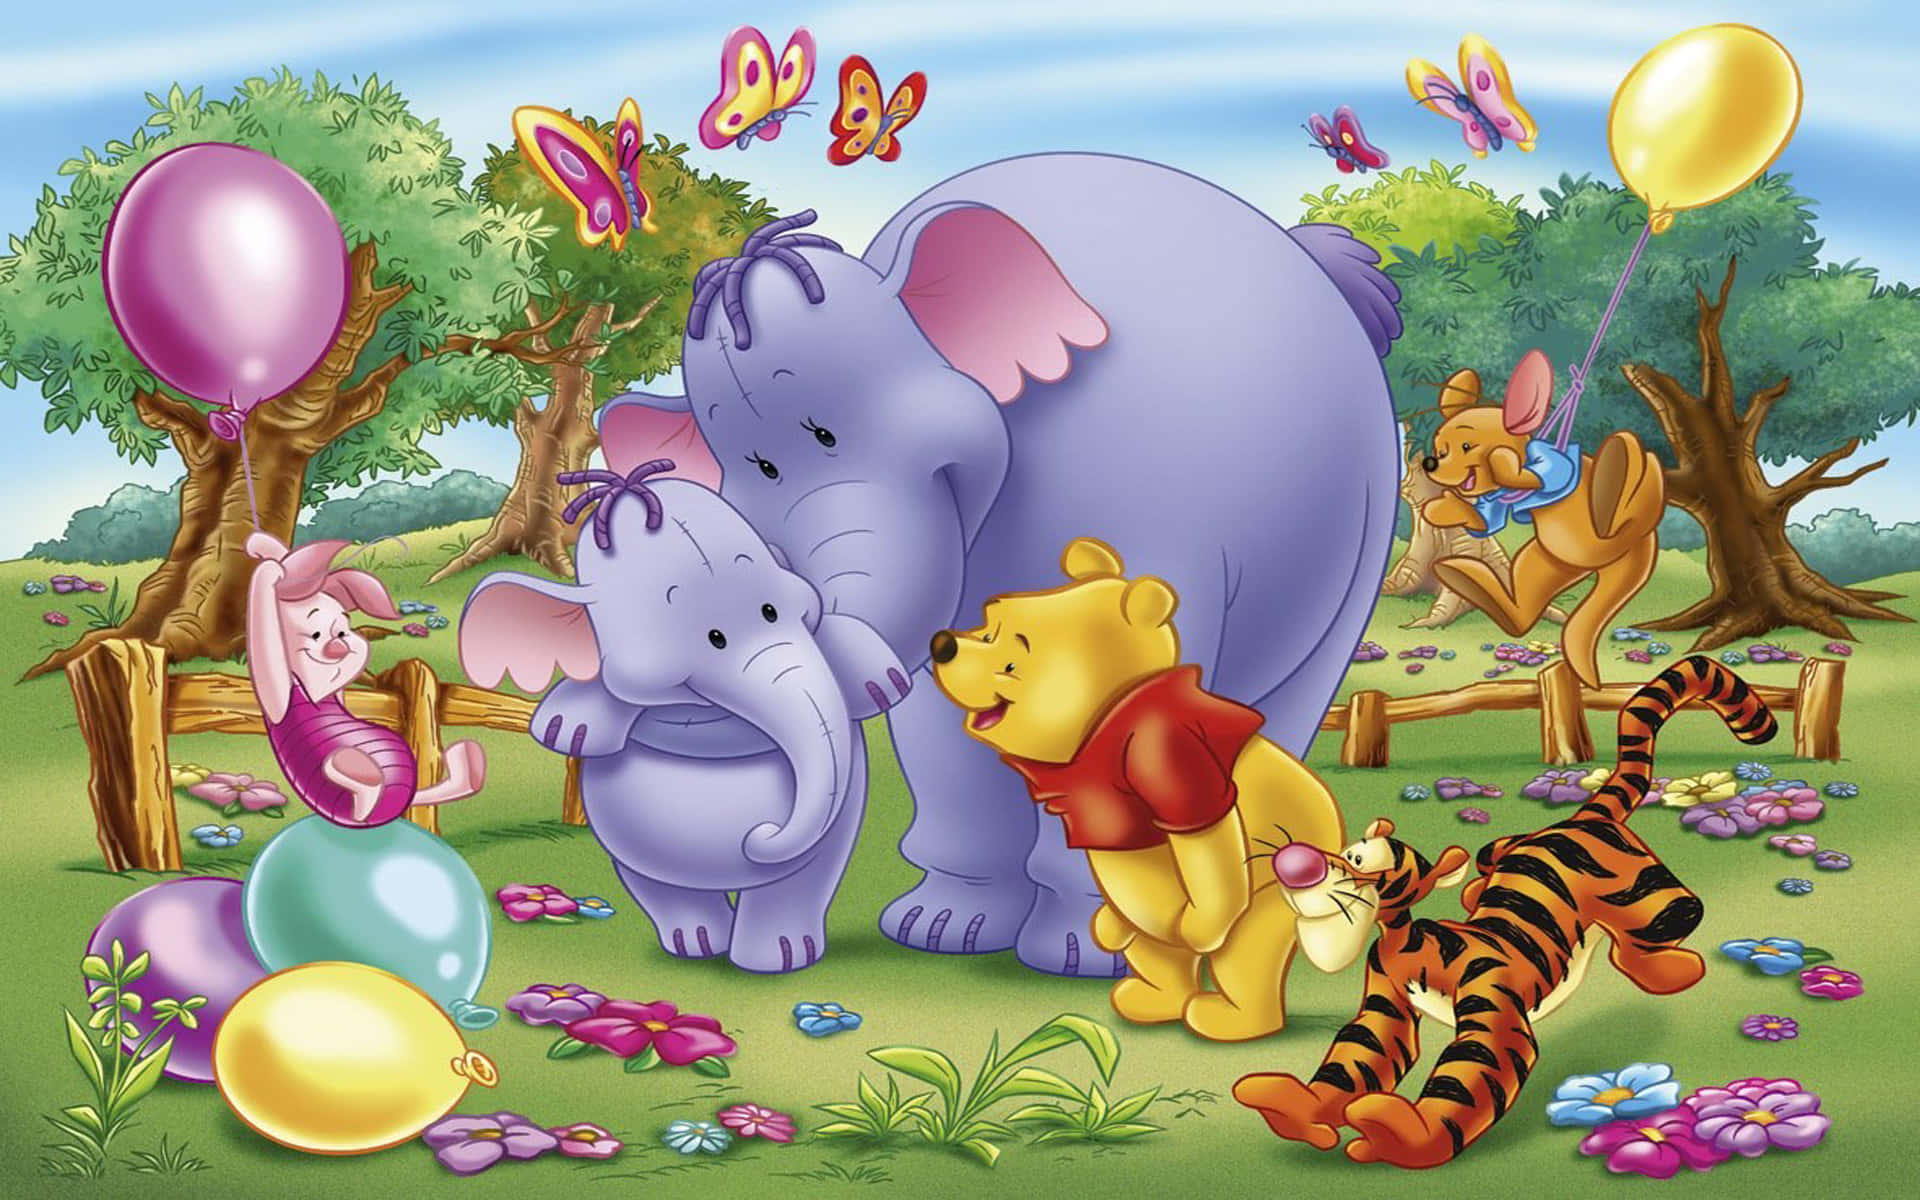 Cozy Up With Best Friends- Winnie The Pooh.